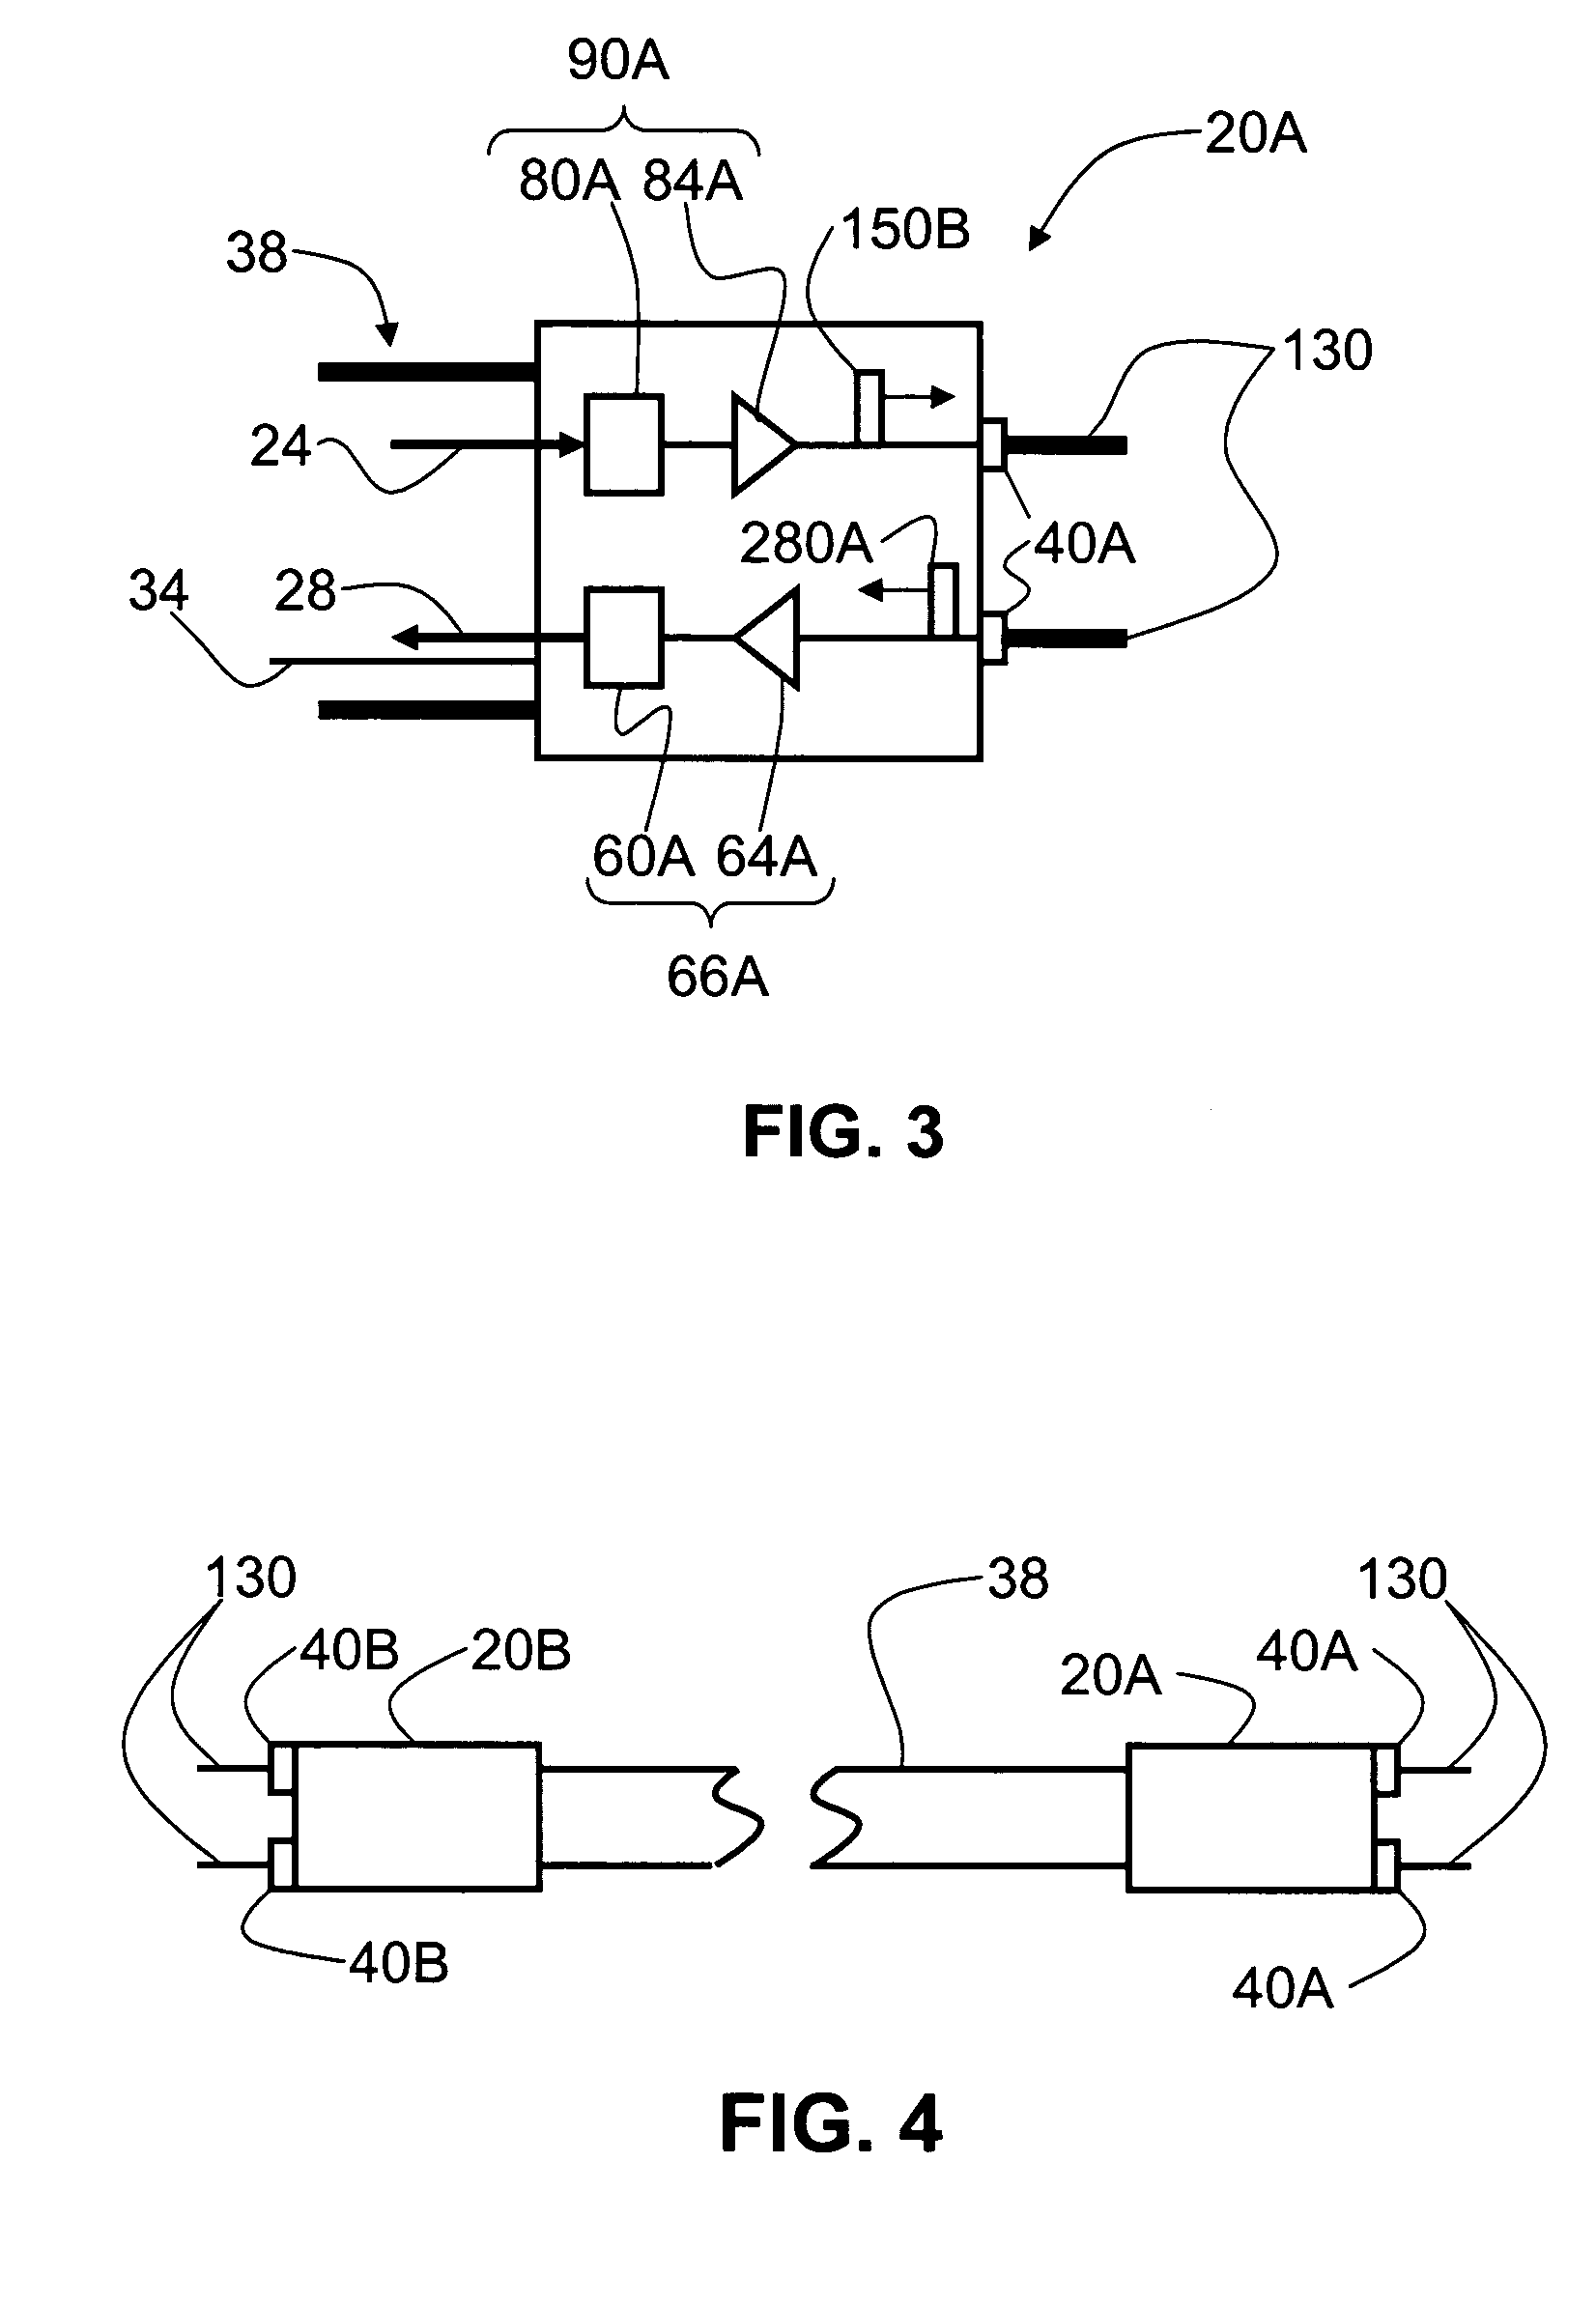 Electrical-optical cable for wireless systems